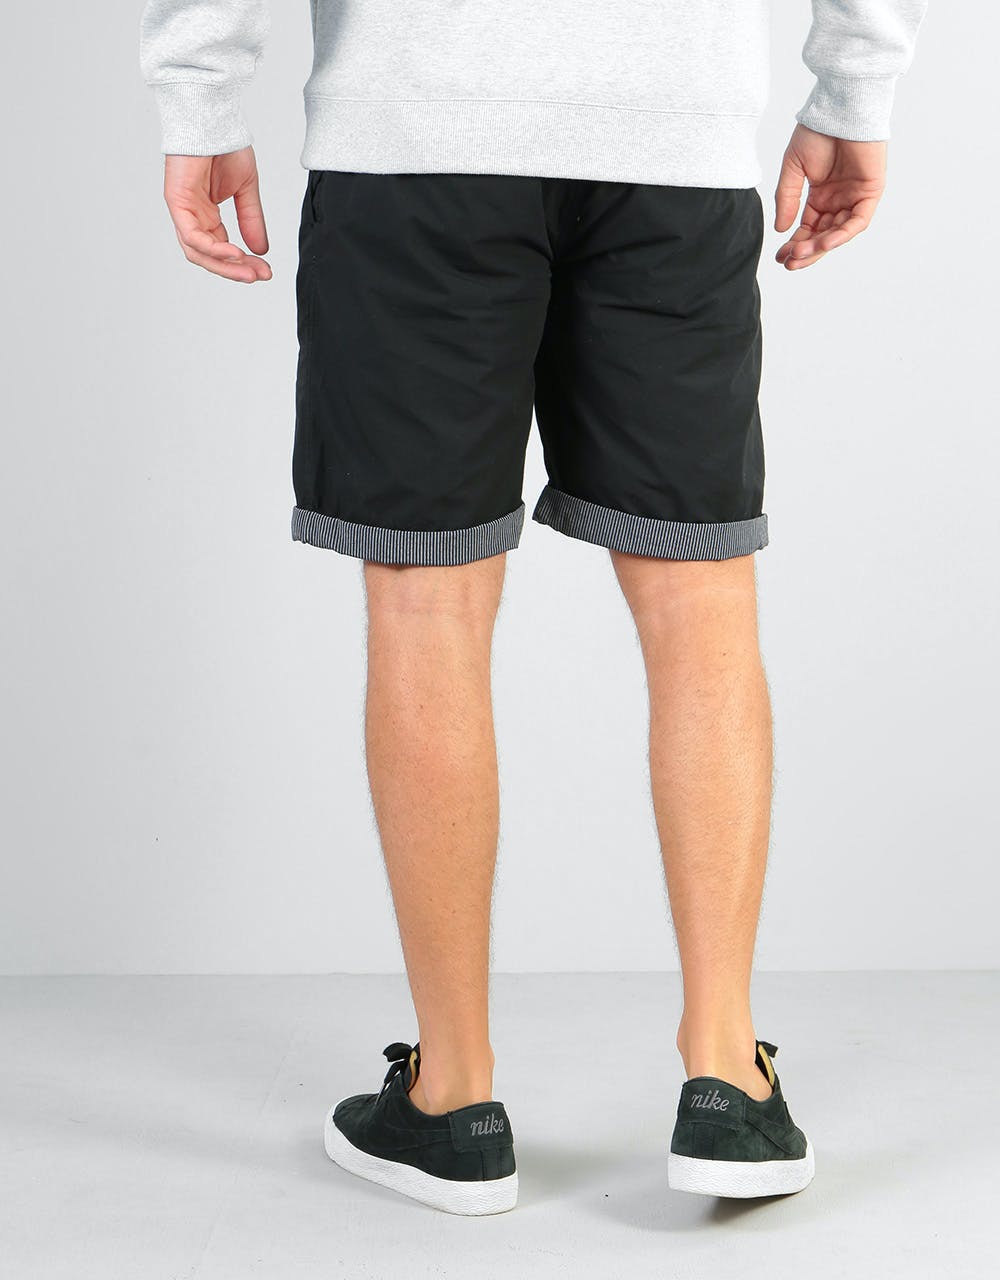 Route One Tailor Shorts - Black